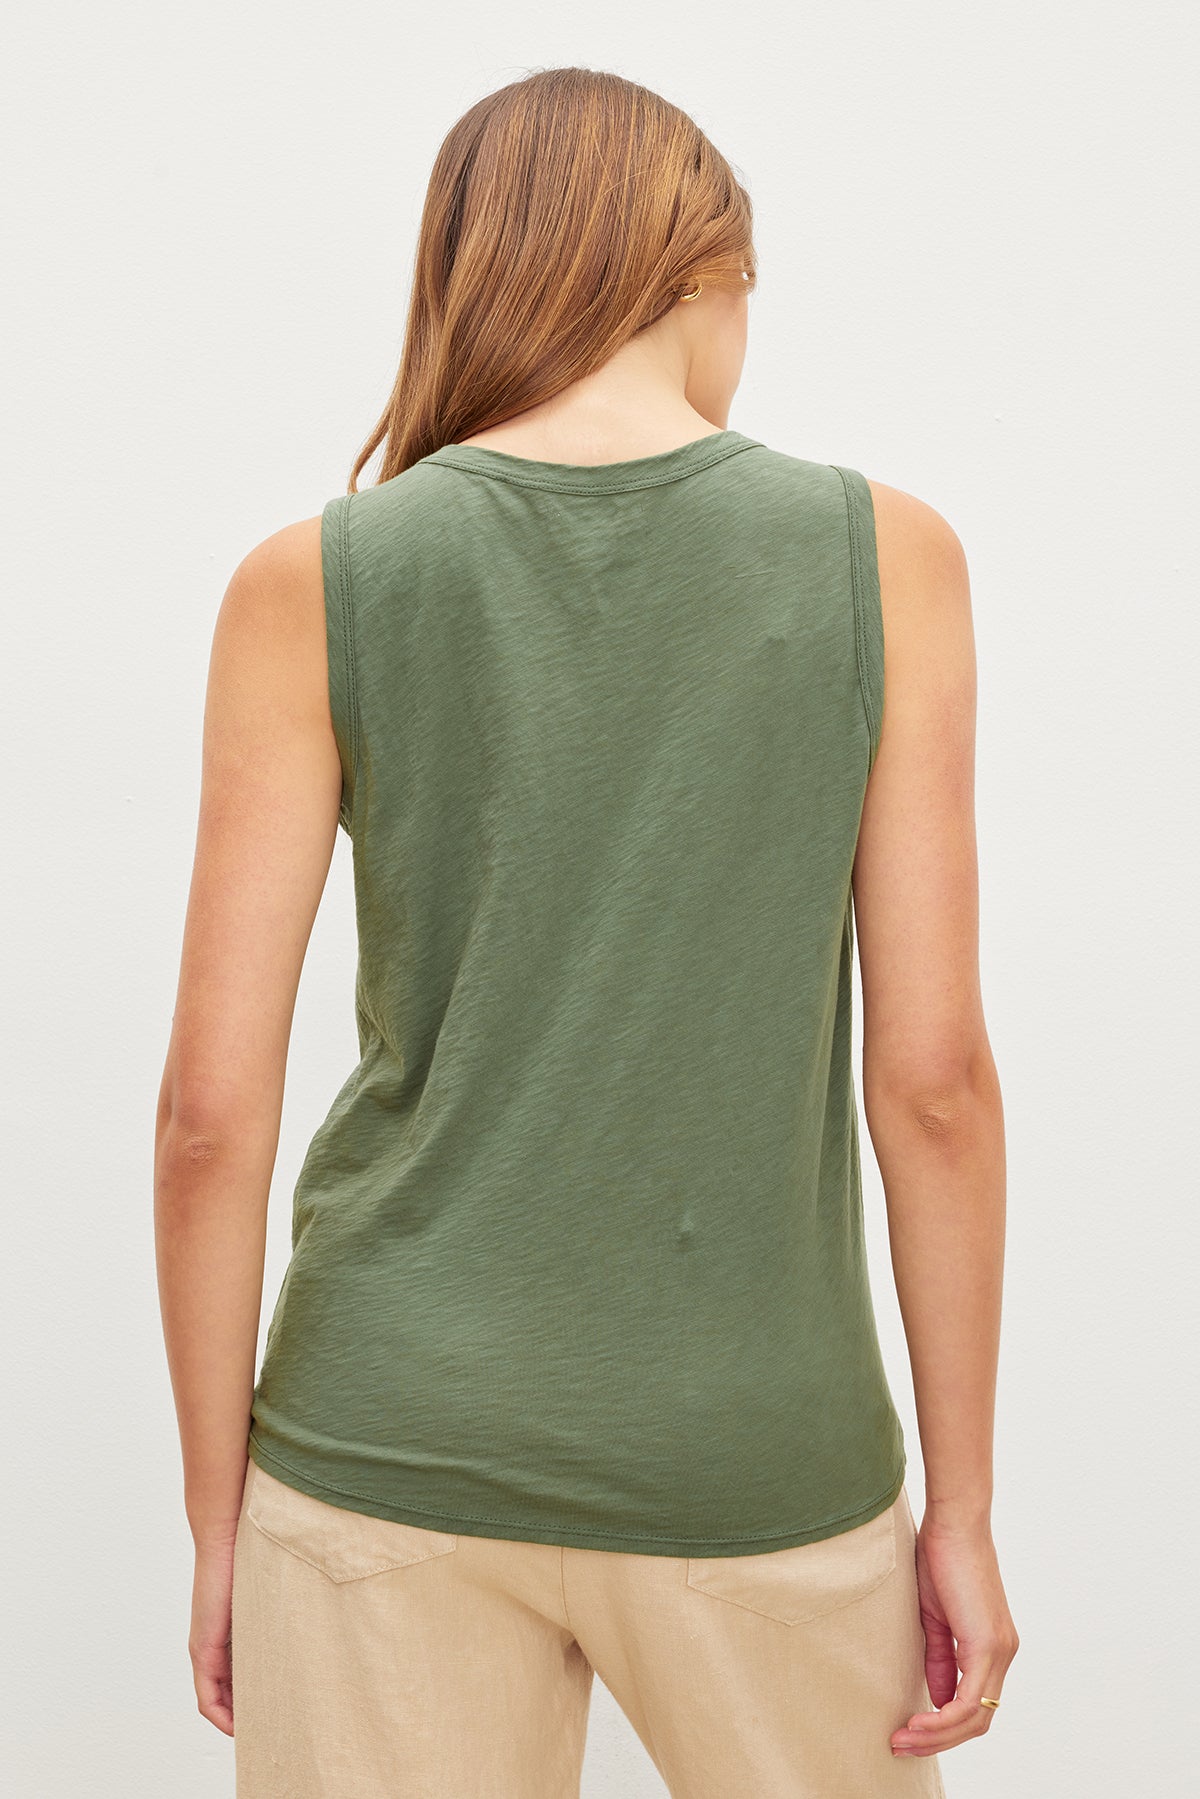 Woman viewed from behind, wearing a green crew-neck TAURUS COTTON SLUB TANK and beige pants, standing against a white background by Velvet by Graham & Spencer.-35982876410049